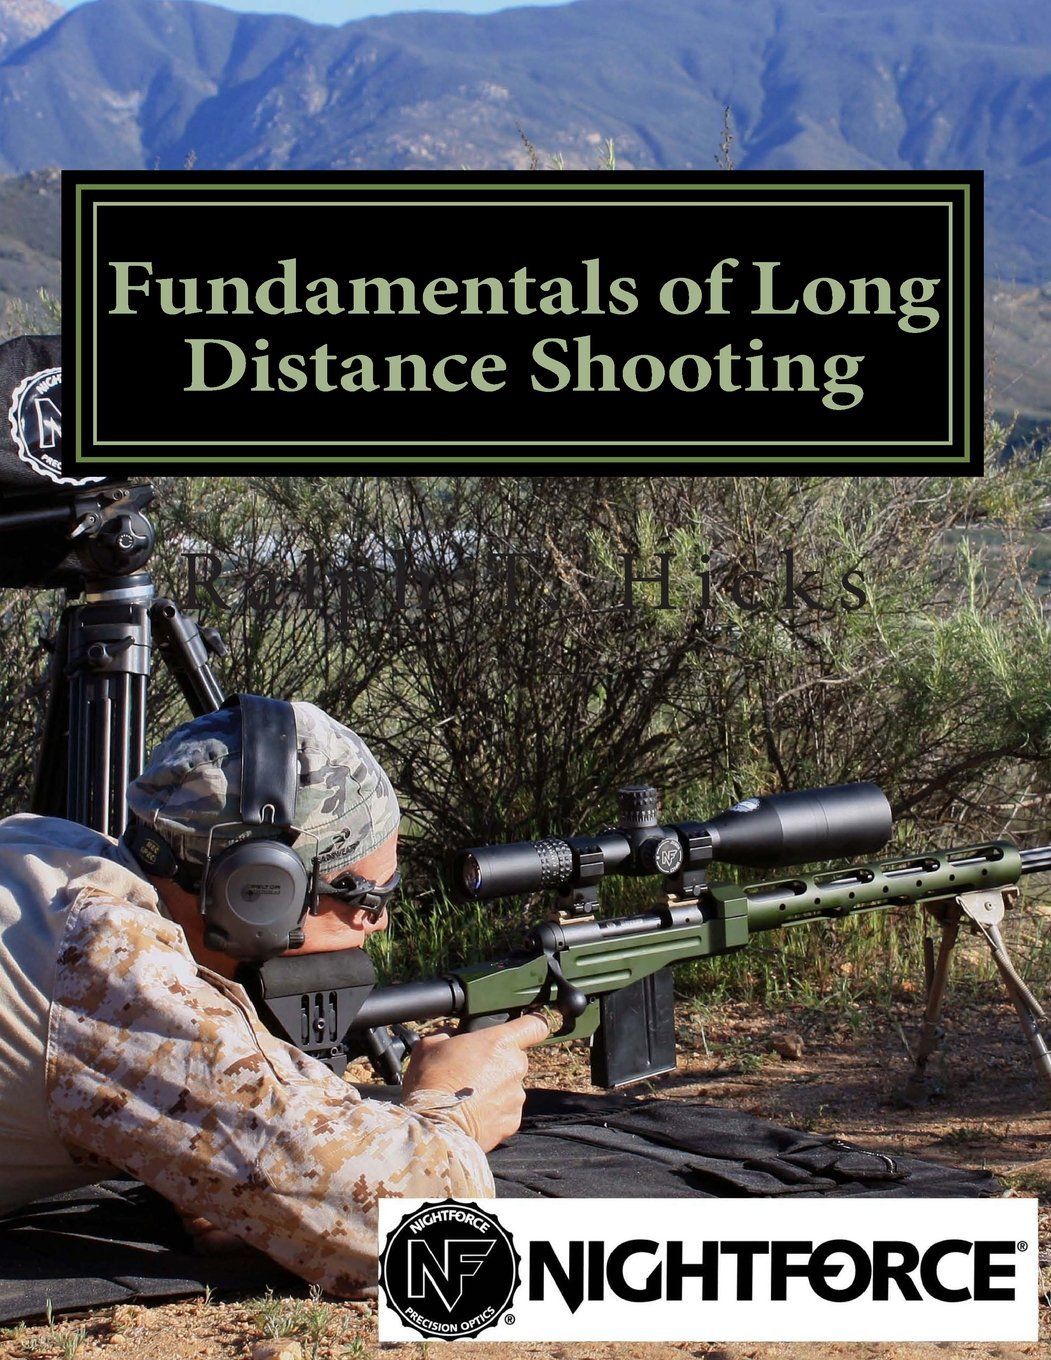 Fundamentals of Long Distance Shooting: Beginners to advanced shooters